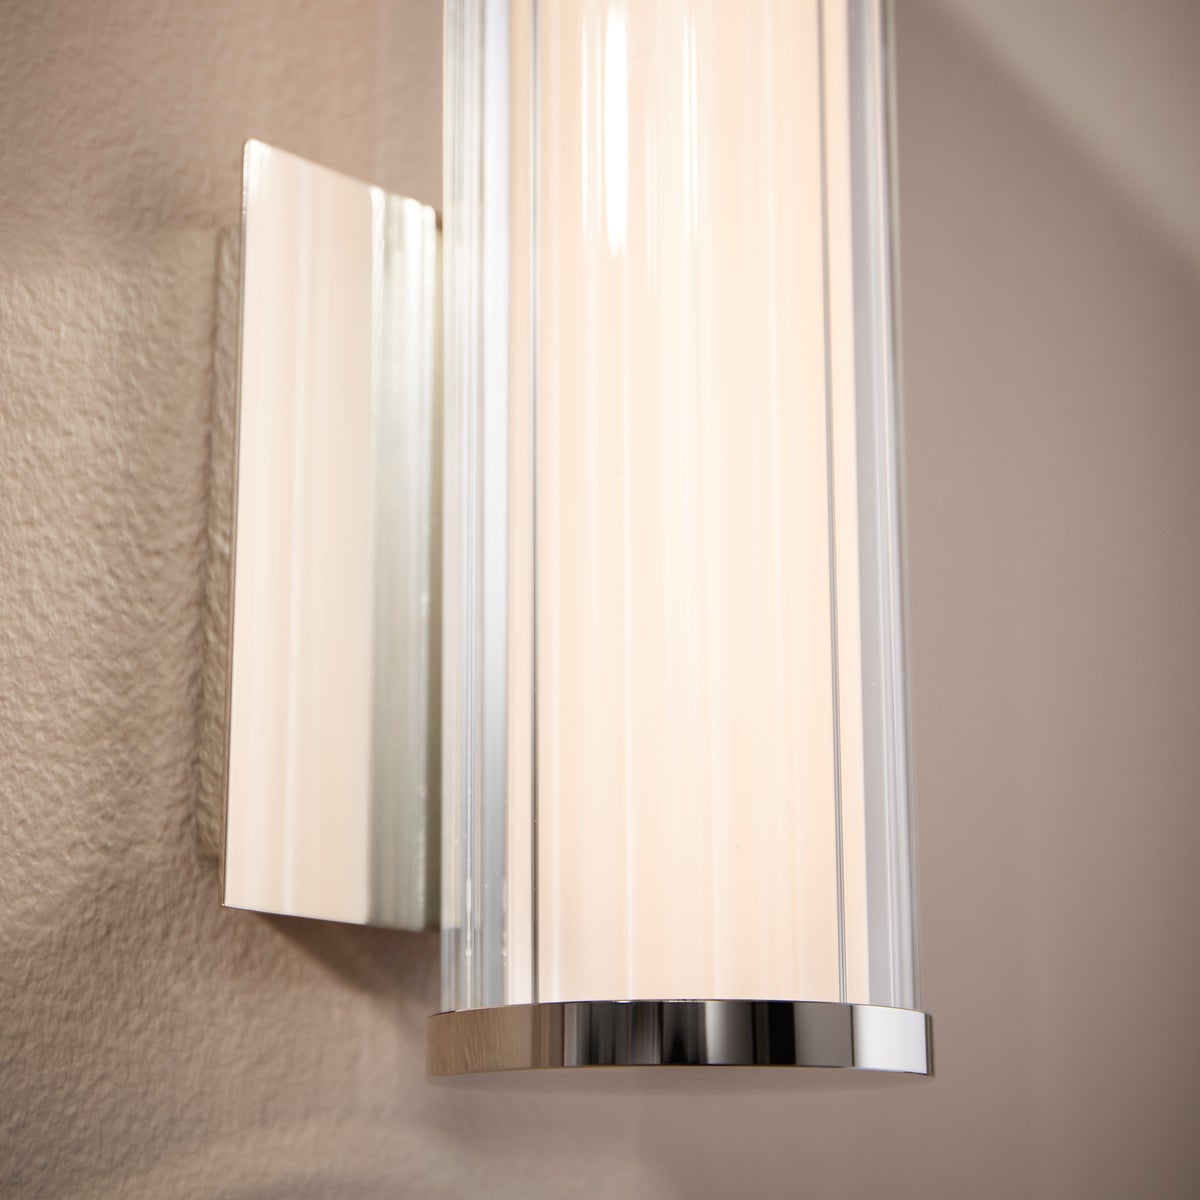 LED Wall Sconce with clean lines and subtle sophistication. Perfect for modern applications. Suitable for any residential space. 9 Watts, 120V input voltage, 689 lumens, 3000K color temperature, dimmable. UL Listed. Damp Location safety rated. 2-year warranty.